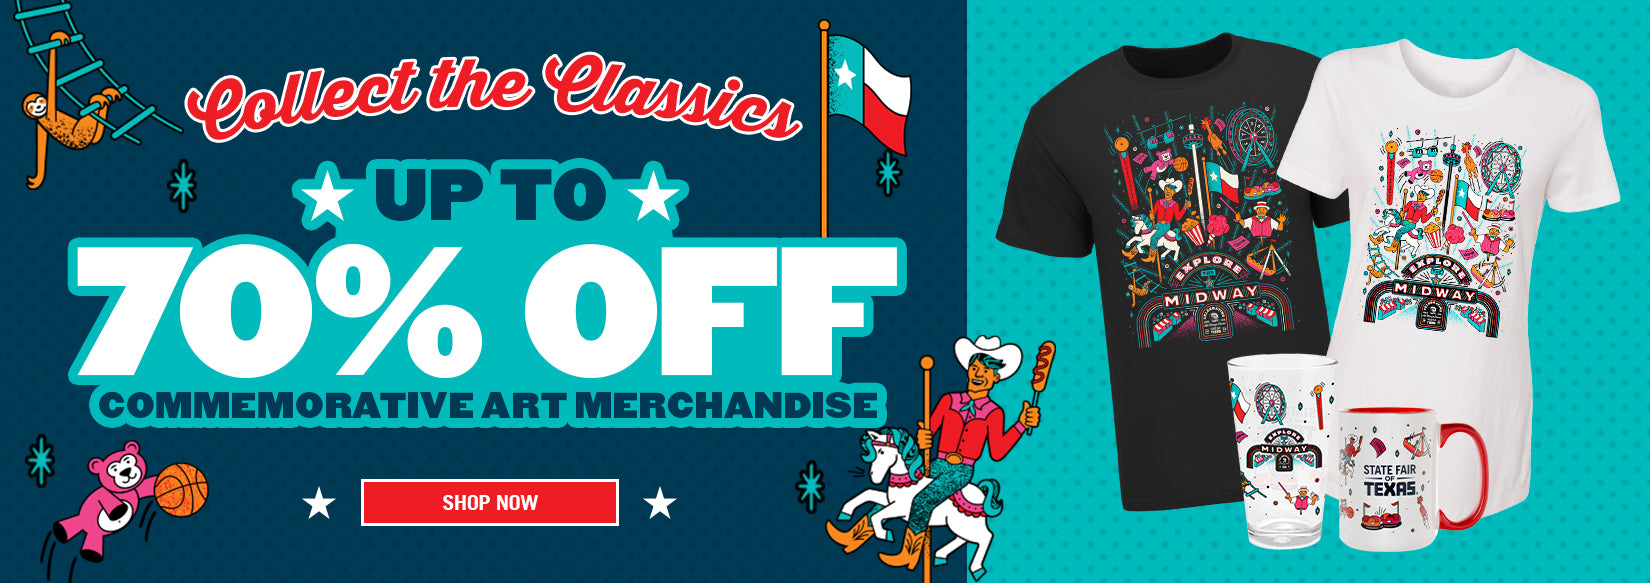 Lone Star Savings, Texas Independence Day Sale, 20% OFF SELECT STYLES  Code:TEXAS20